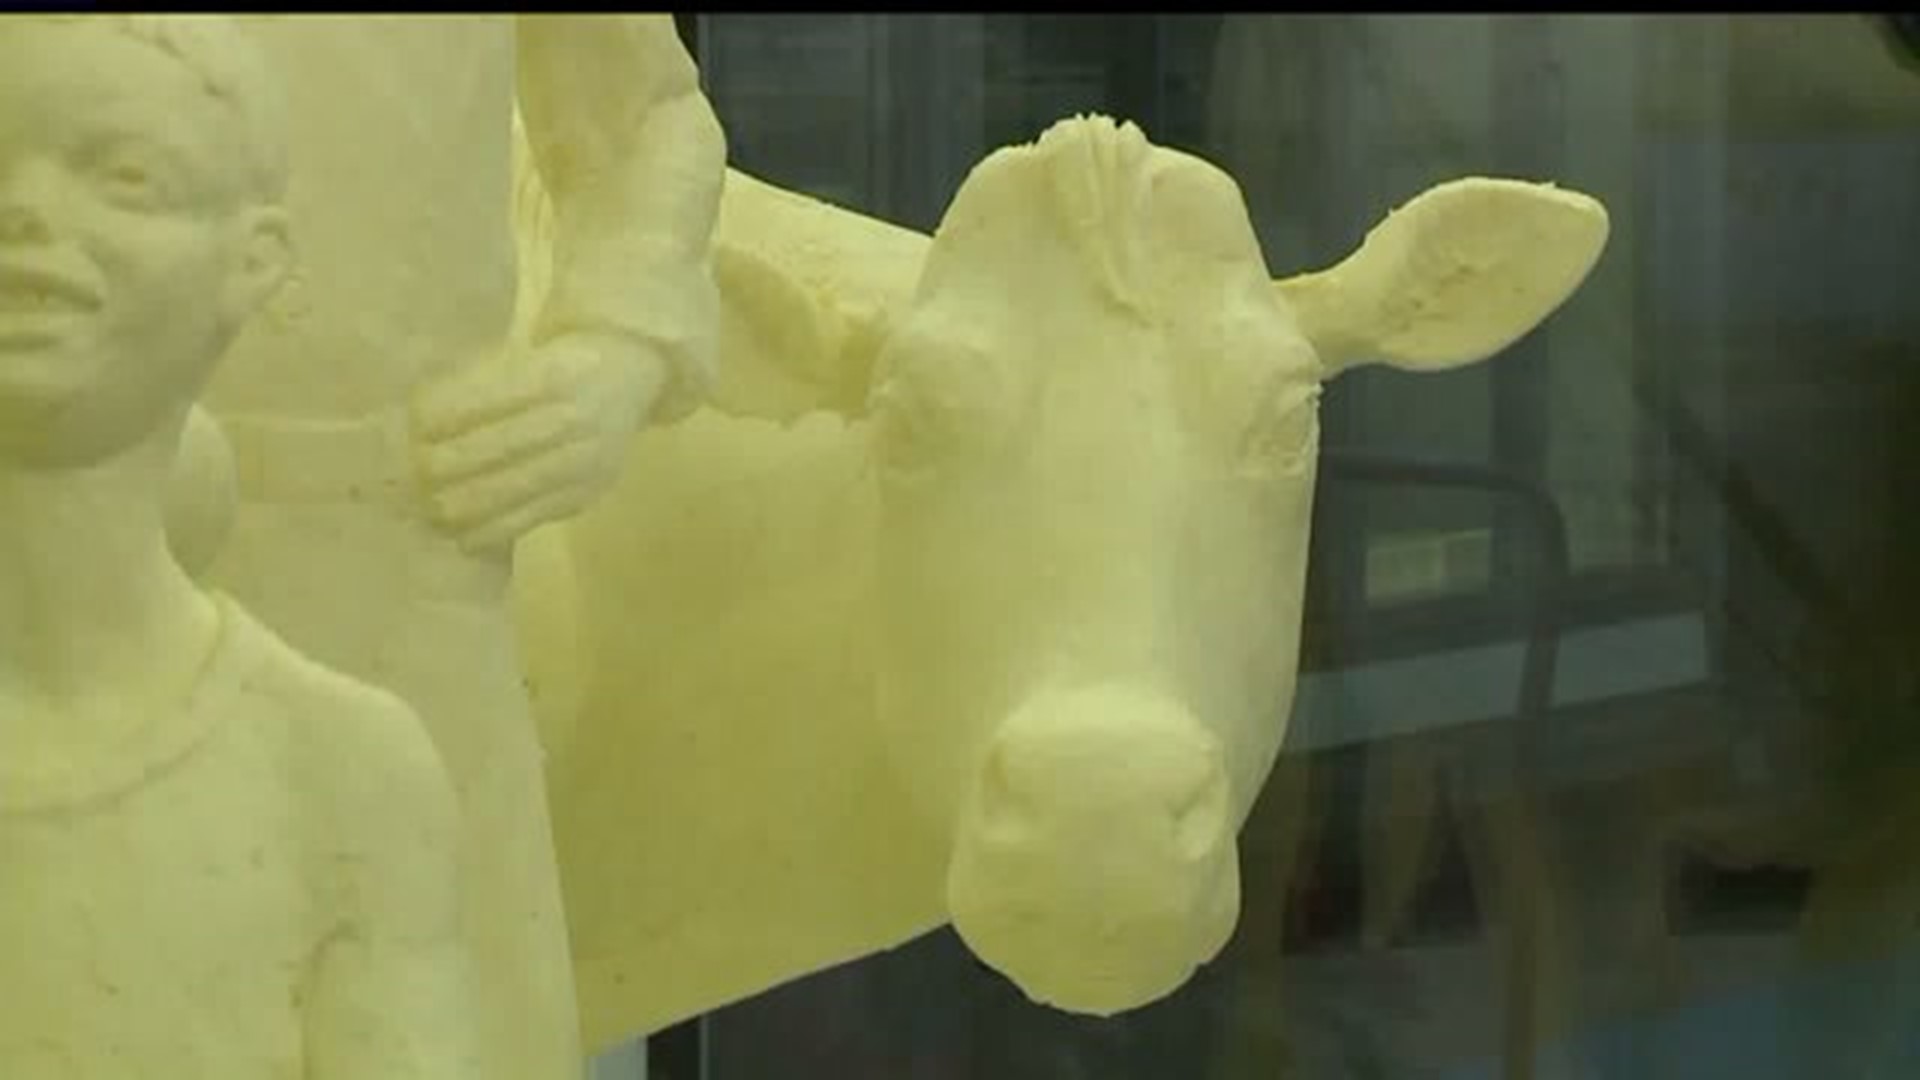 Today is the day the 2017 Farm Show butter sculpture will be unveiled